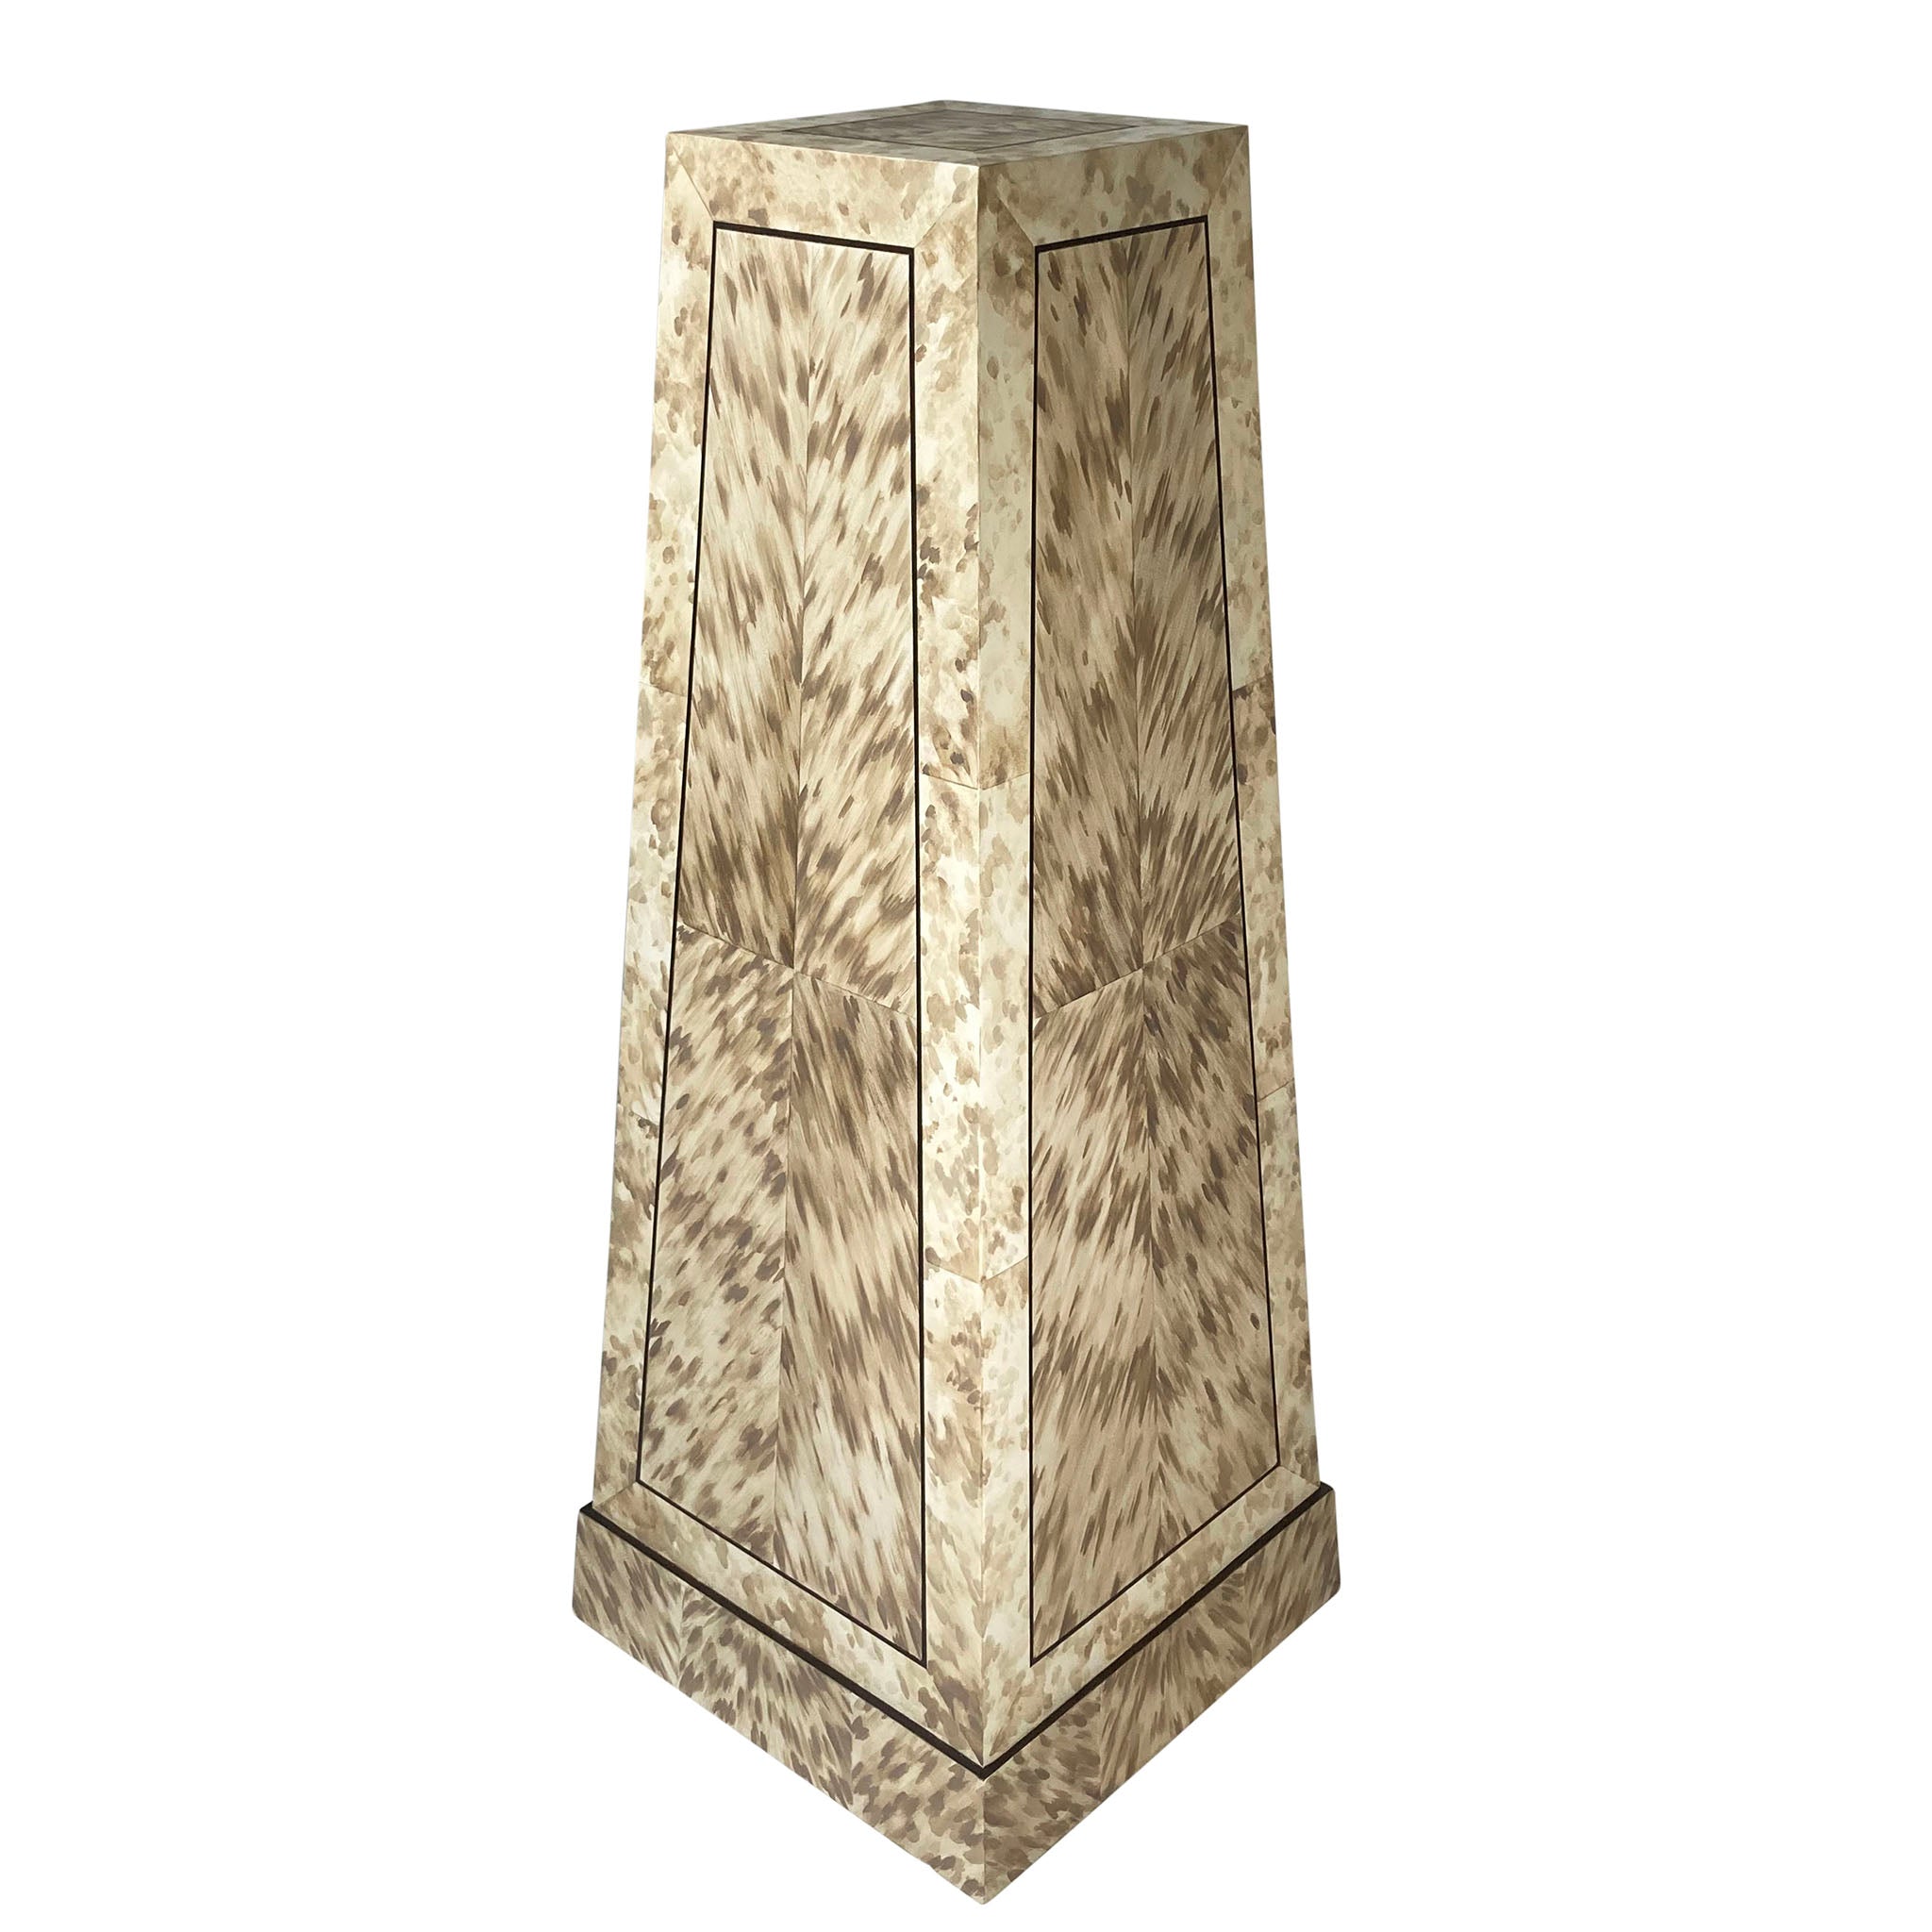 Hand-Painted Square Pedestal in Albino Tortoise